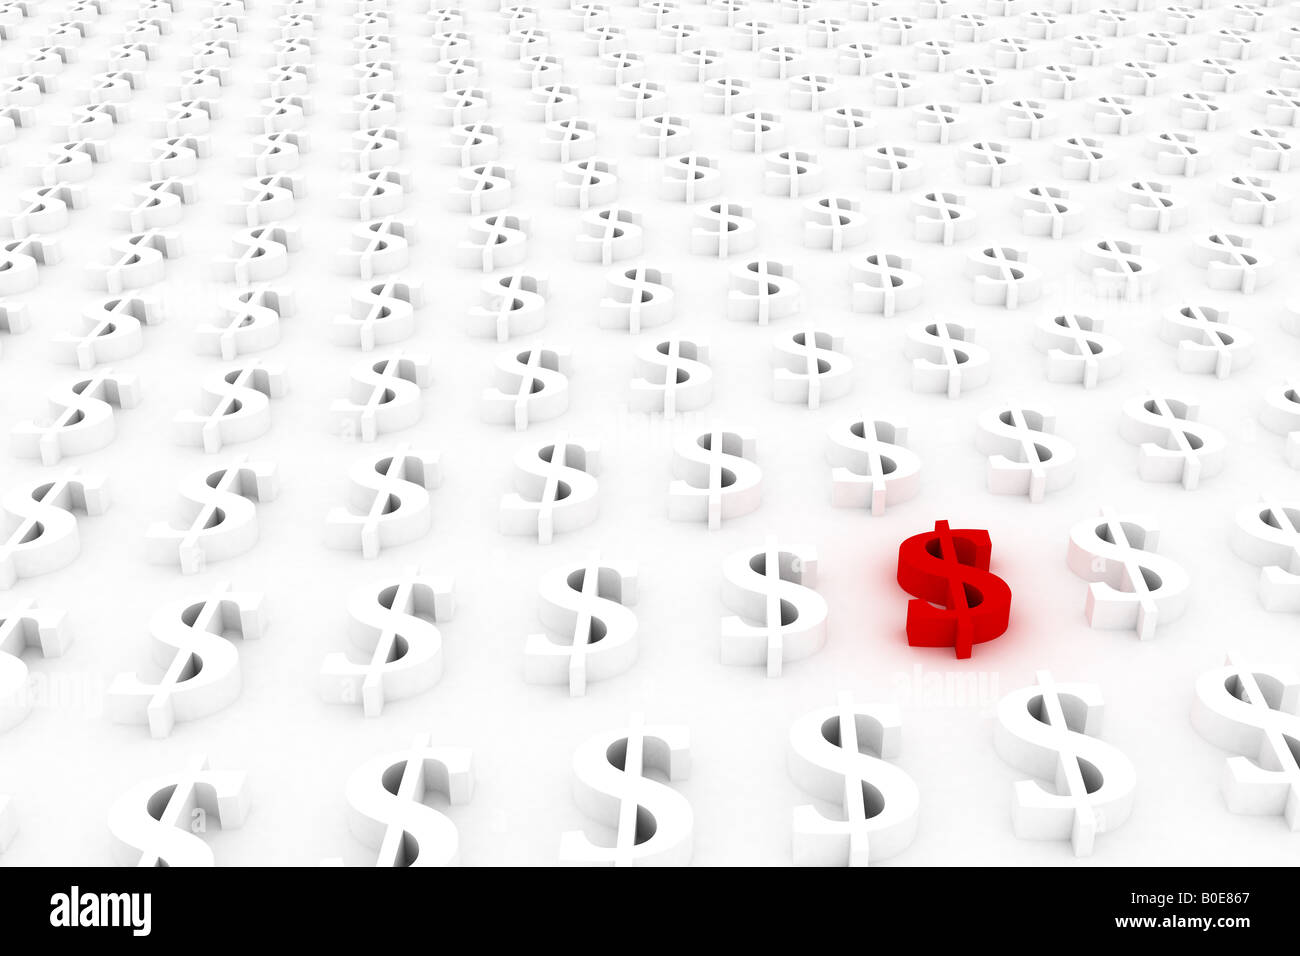 Red different Dollar symbol sticking out of the crowd Stock Photo